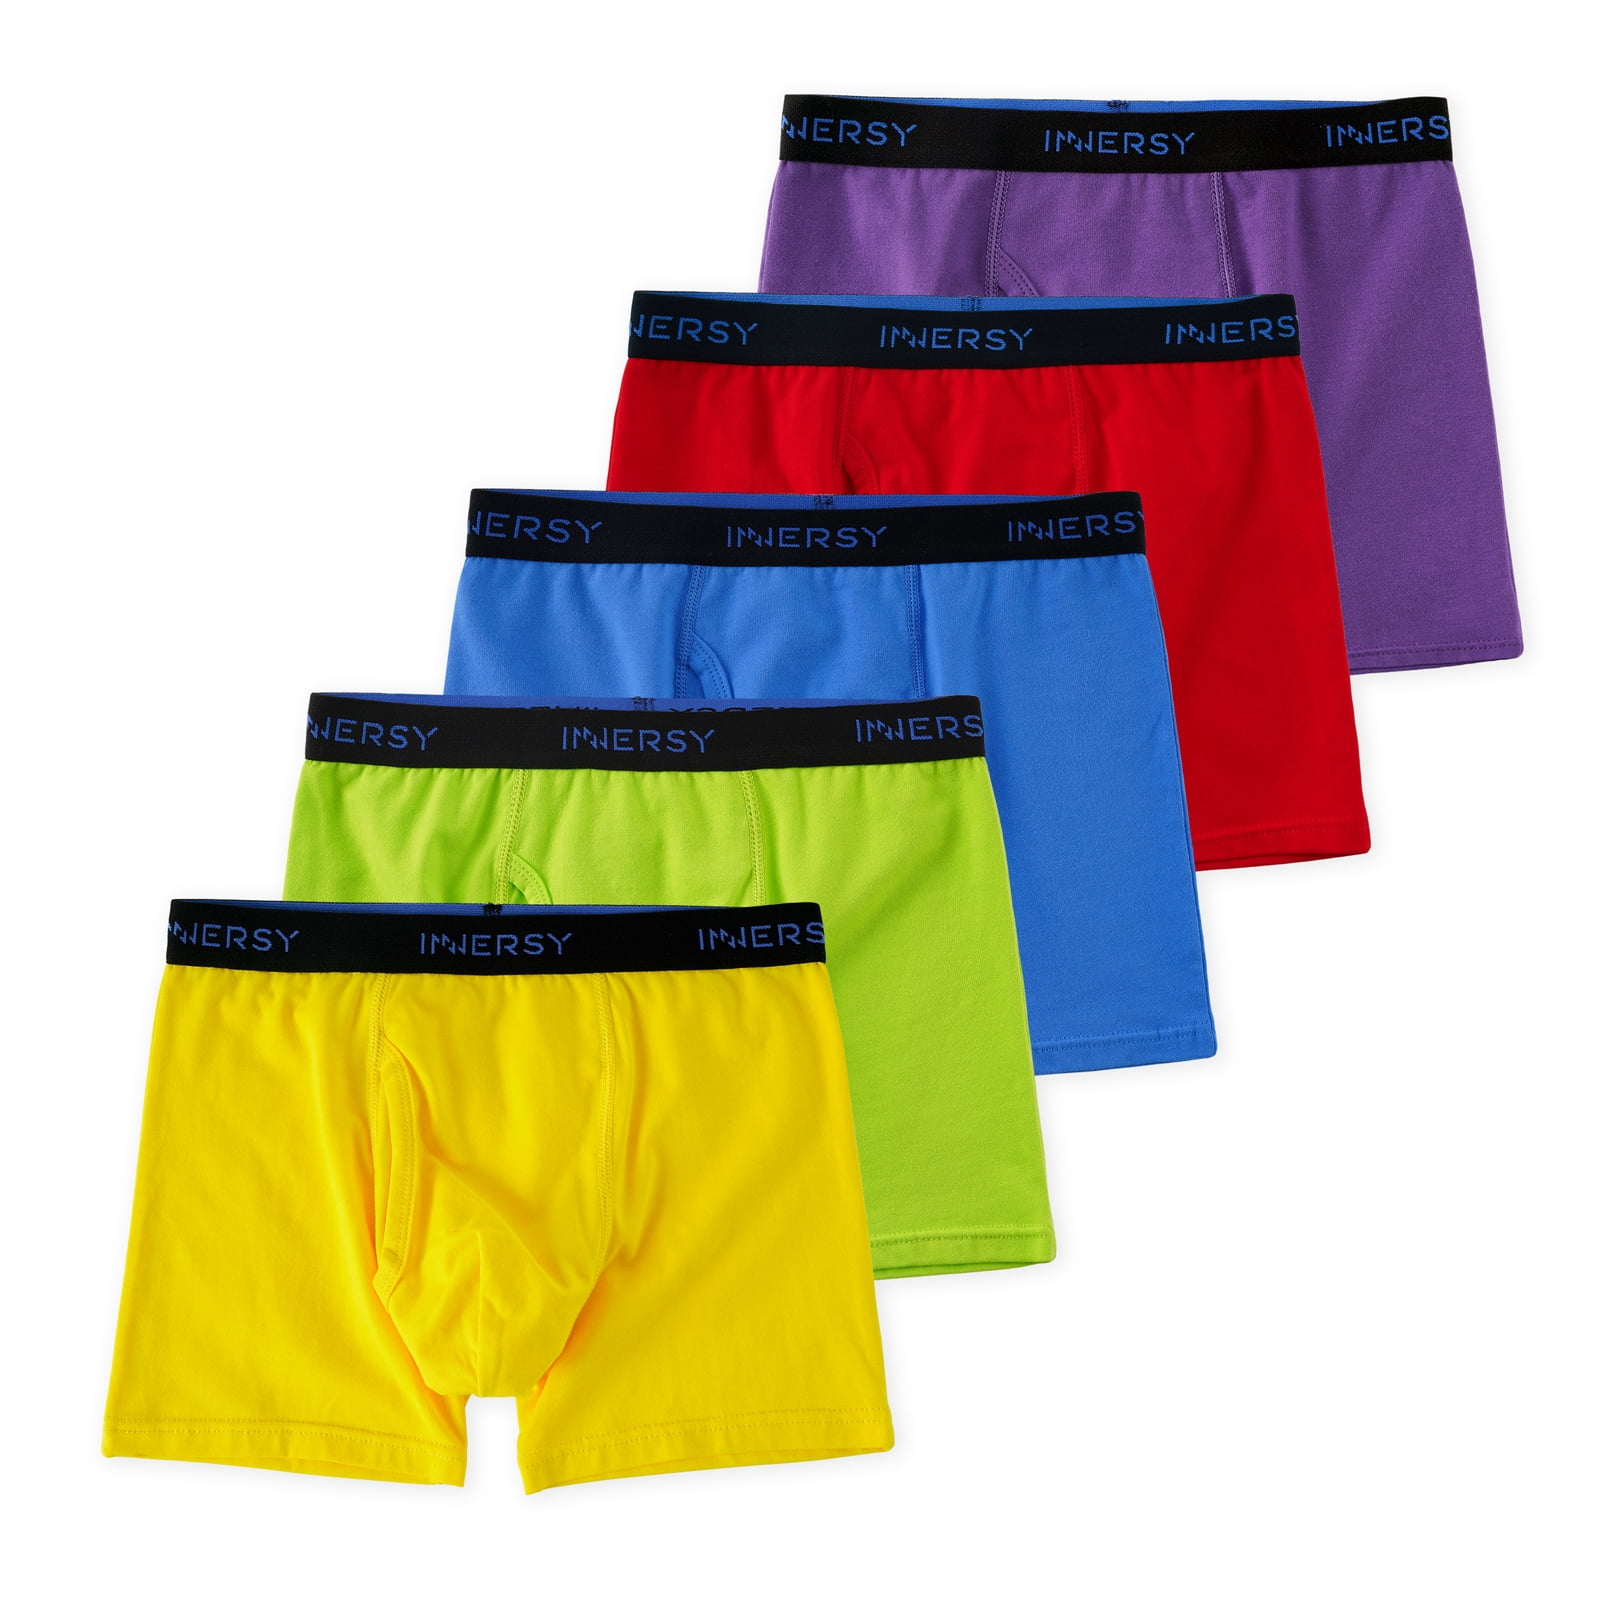 INNERSY Boys Underwear Stretchy Cotton Soft Boxer Briefs for 6-18 Teen Boys  5 Pack (L, Rainbow Colors) 